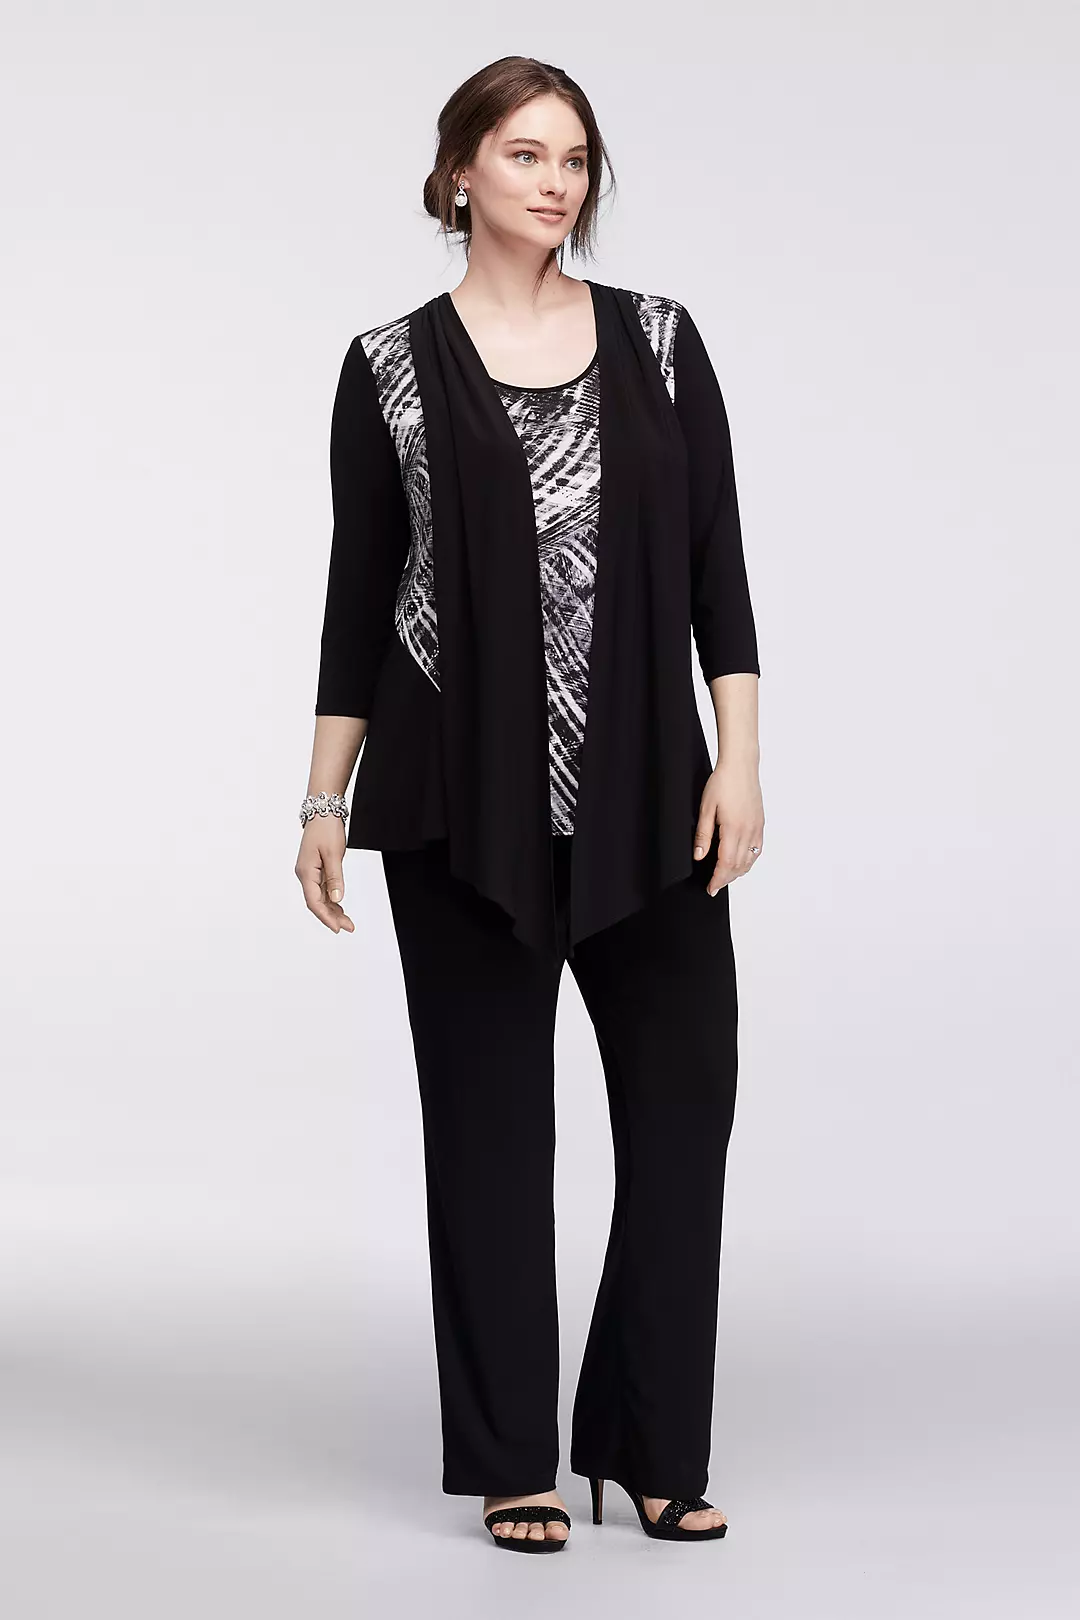 Patterned Pantsuit with Built-In Scarf Image